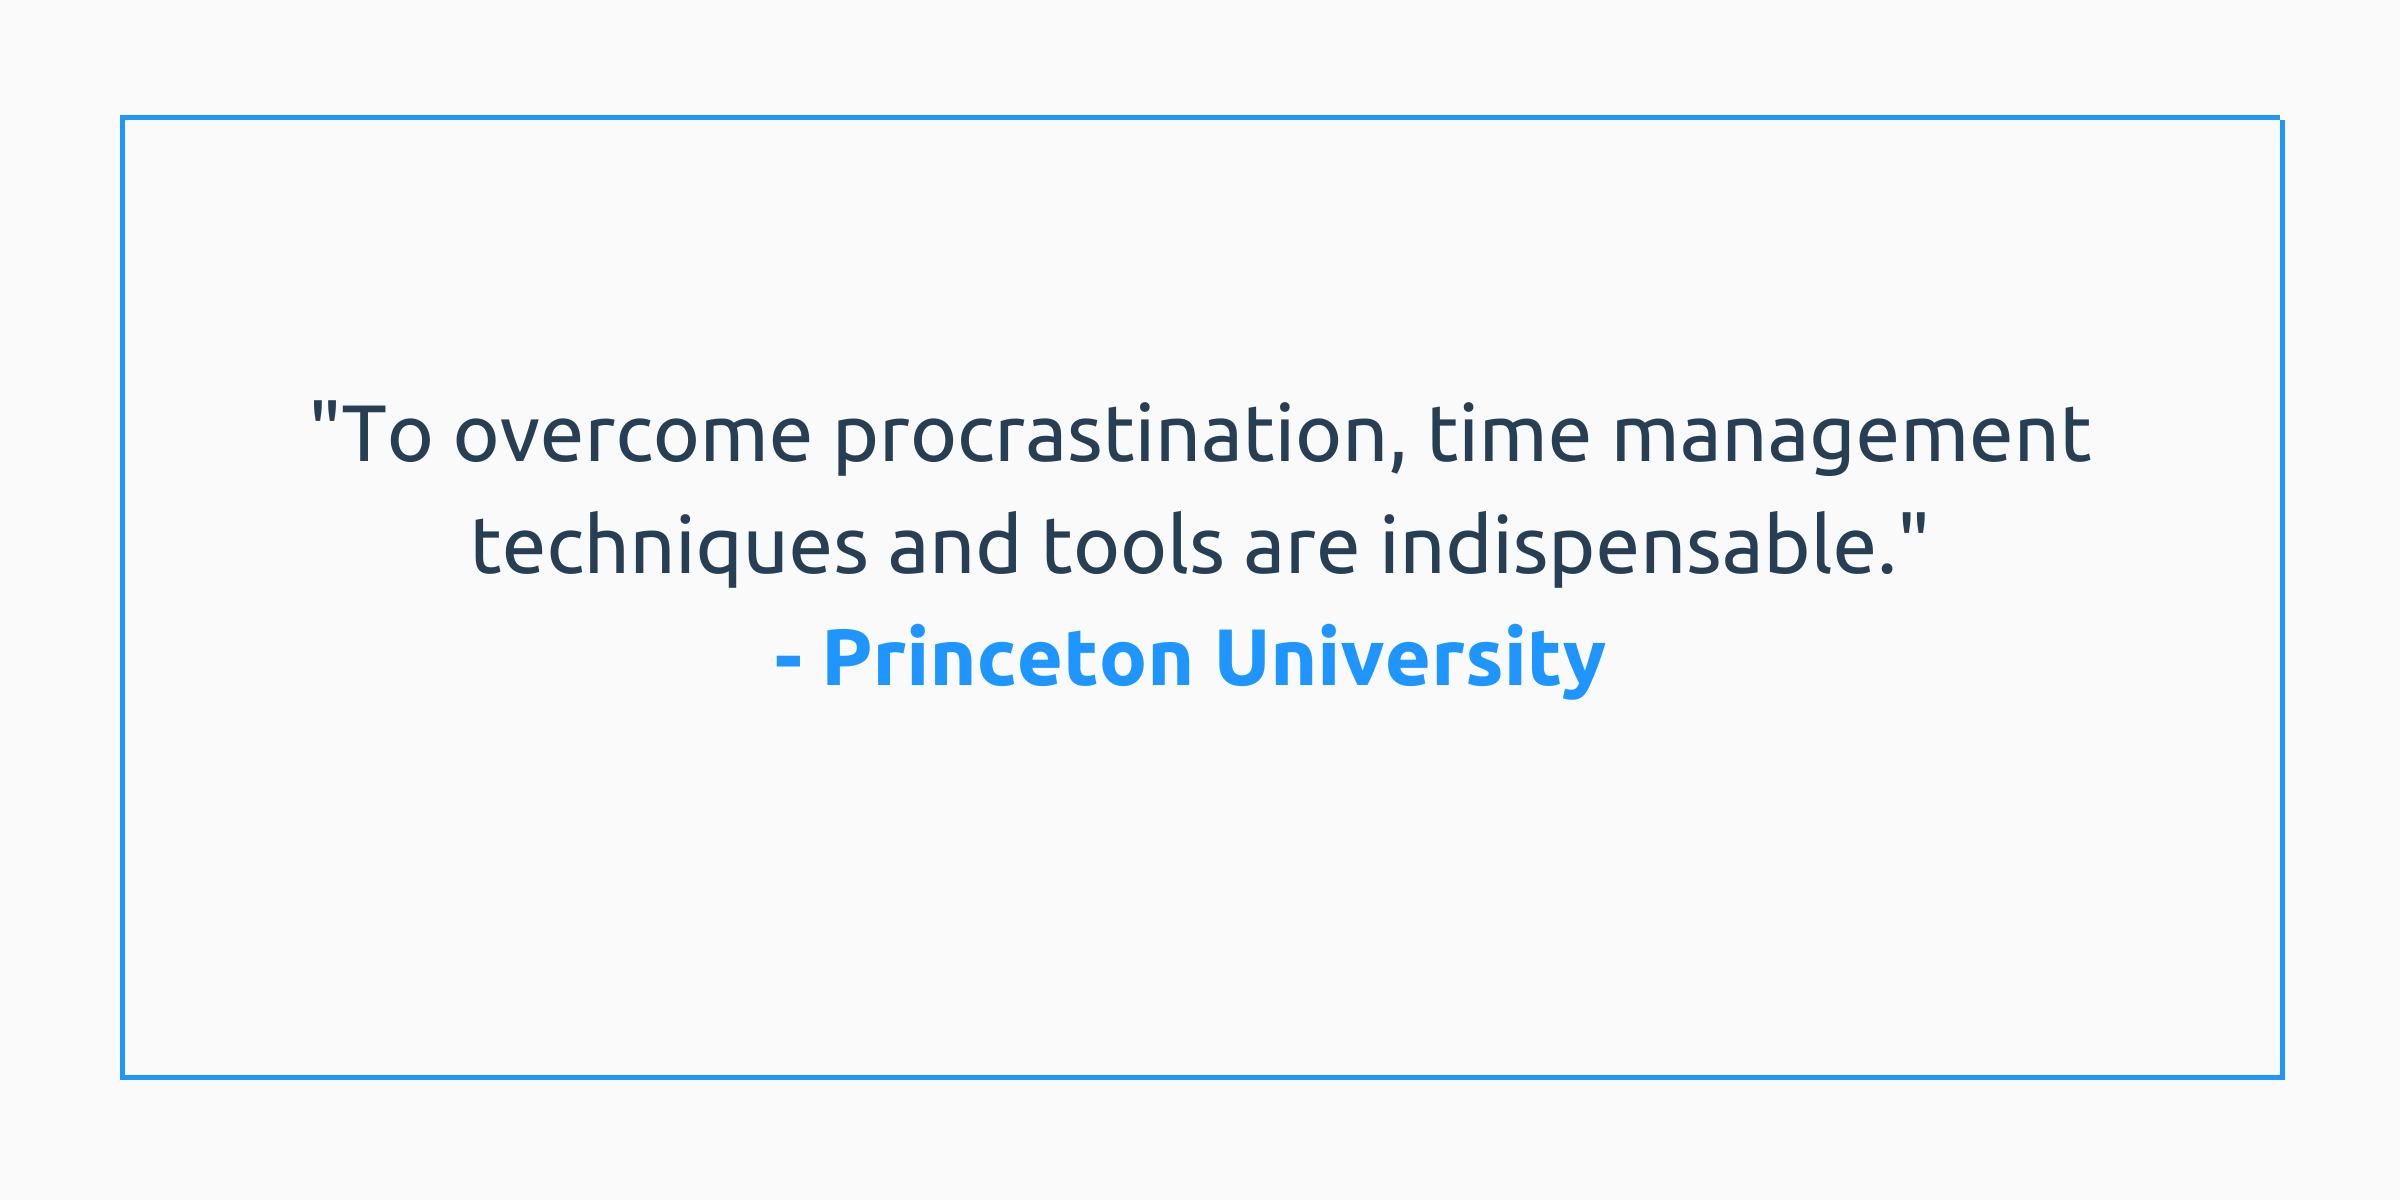 "To overcome procrastination, time management techniques and tools are indispensable." - Princeton University